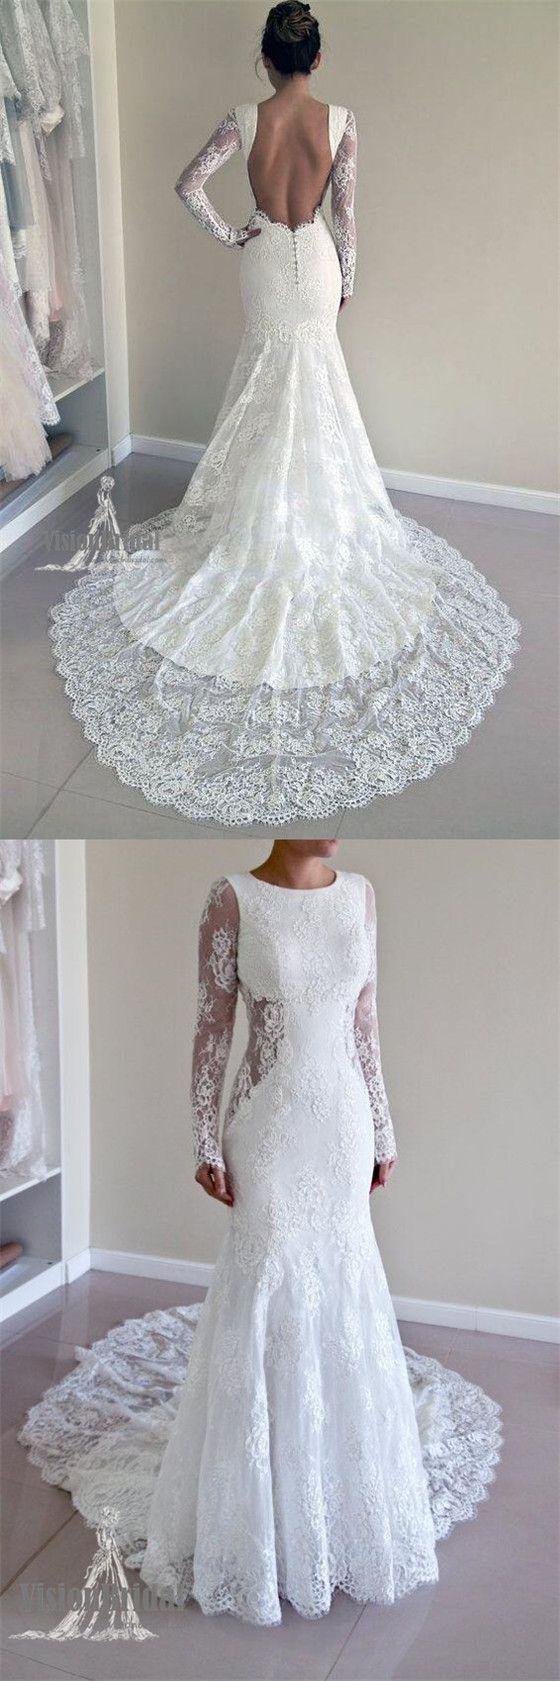 Mariage - Attractive Round Neck Long Sleeves Open Back Lace Wedding Dress With Trailing, Wedding Dress, VB0686